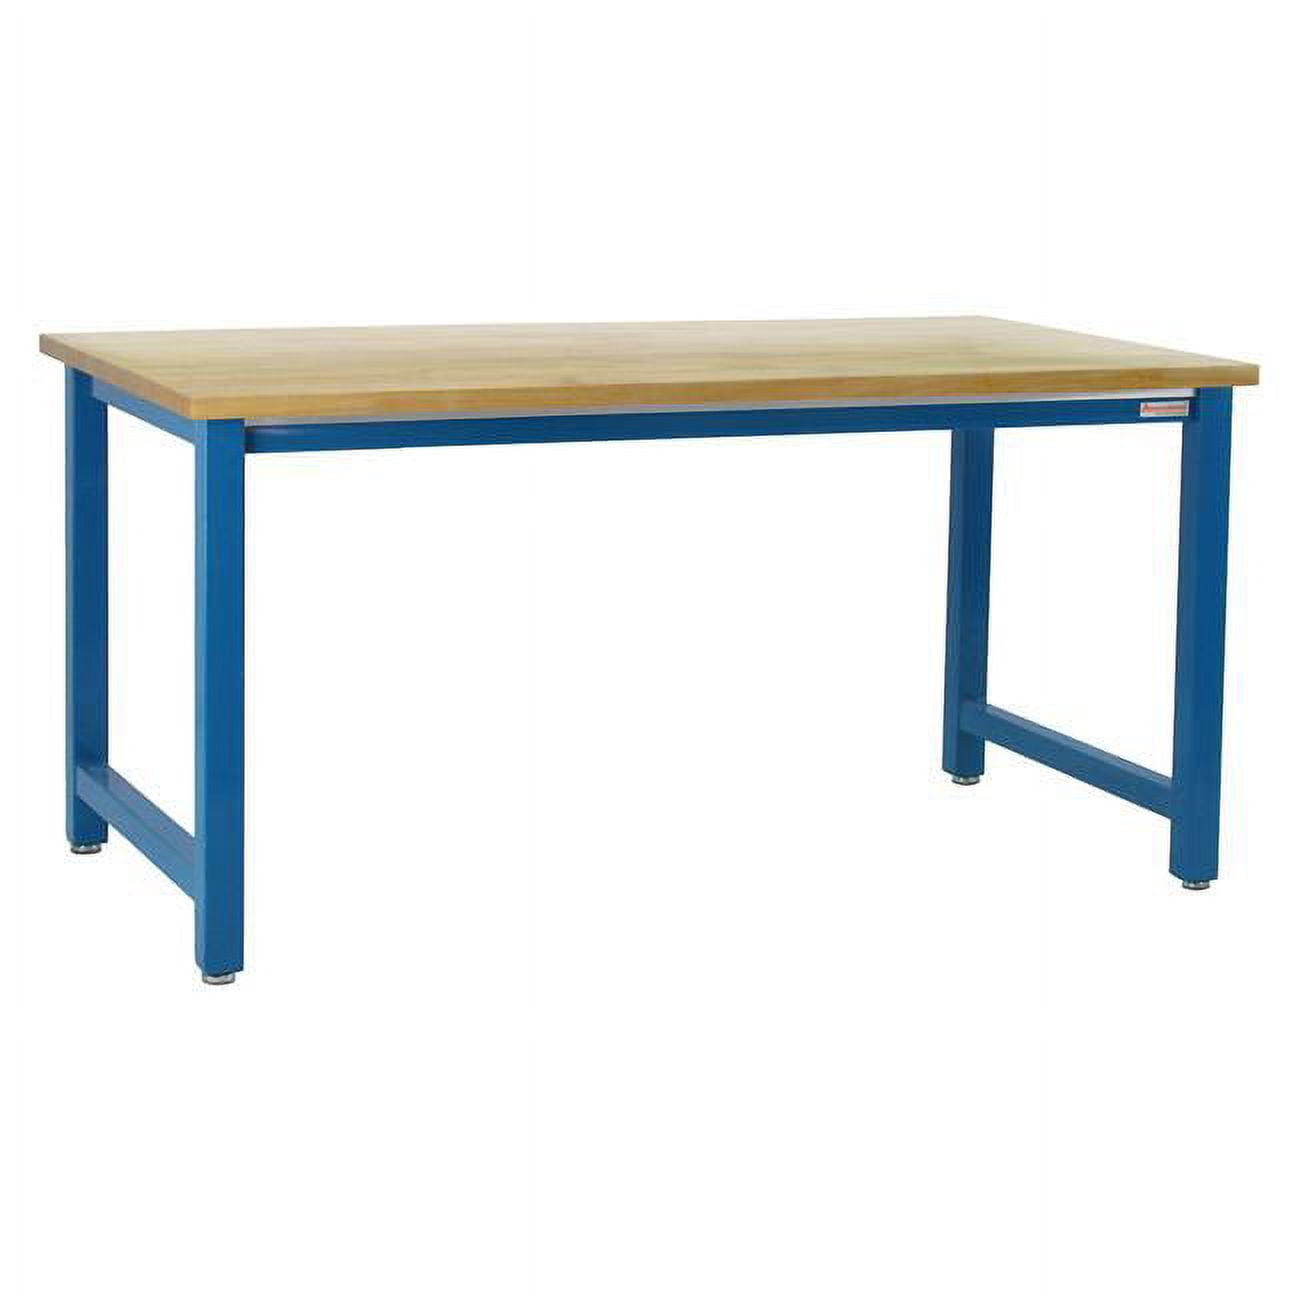 KWL3648-LBFr34 36 x 48 in. Kennedy Workbenches with Solid 1.75 in. Thick Lacquered Finish Maple Butcher Block Top, Light Blue -  BenchPro